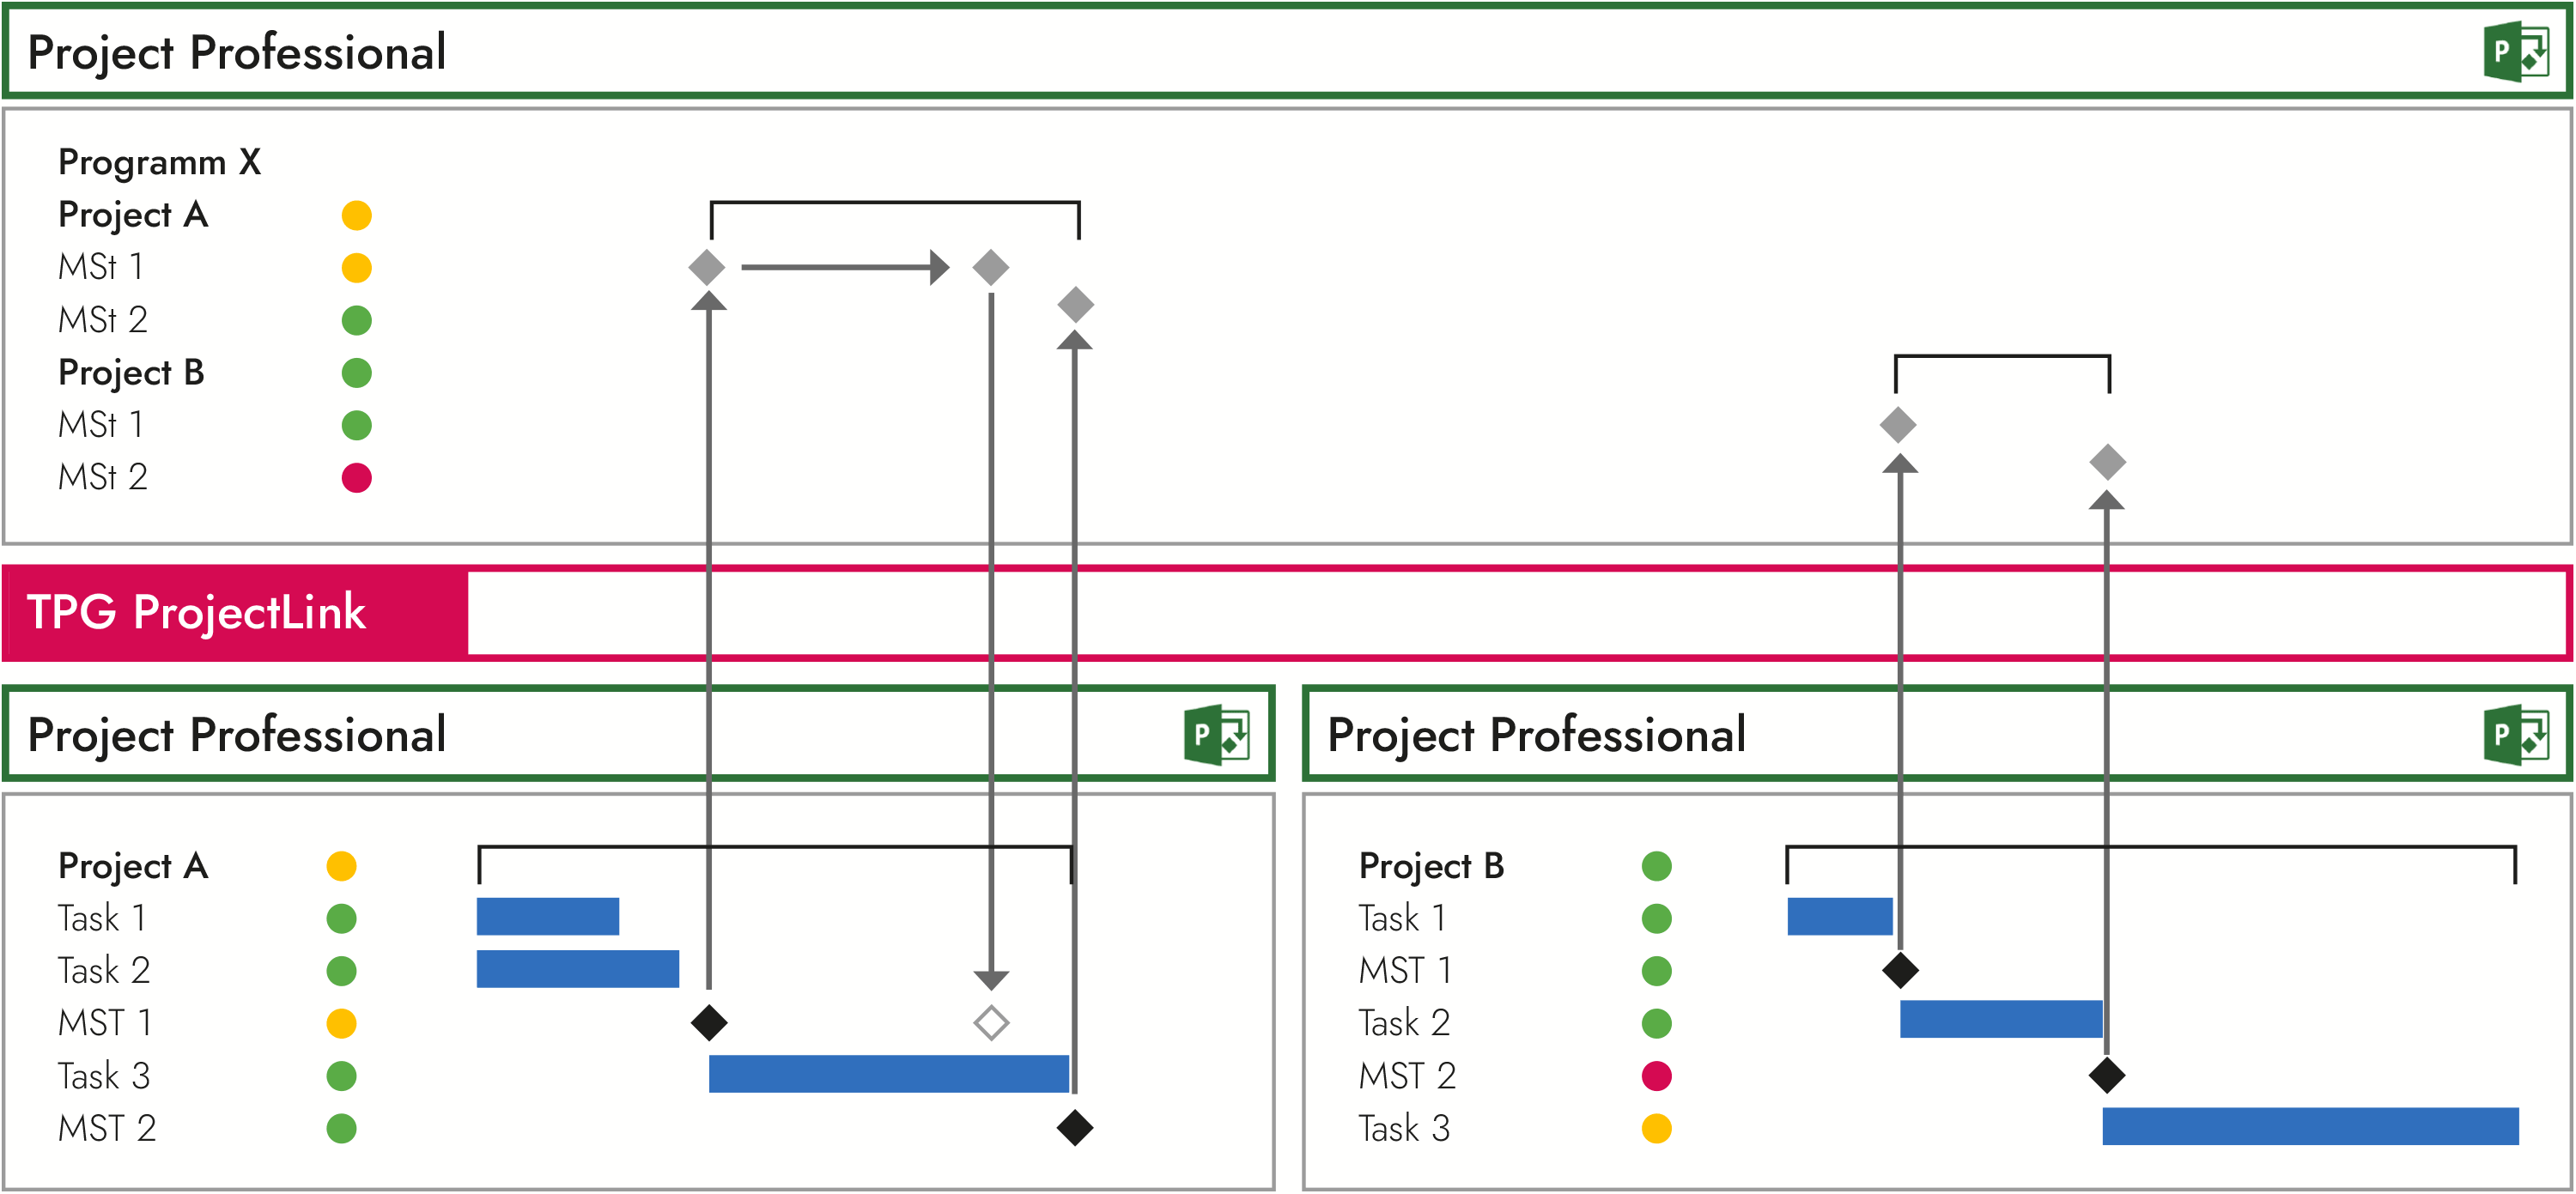 Program Management – Bottom-up and top-down control between the program plan and the individual project plans